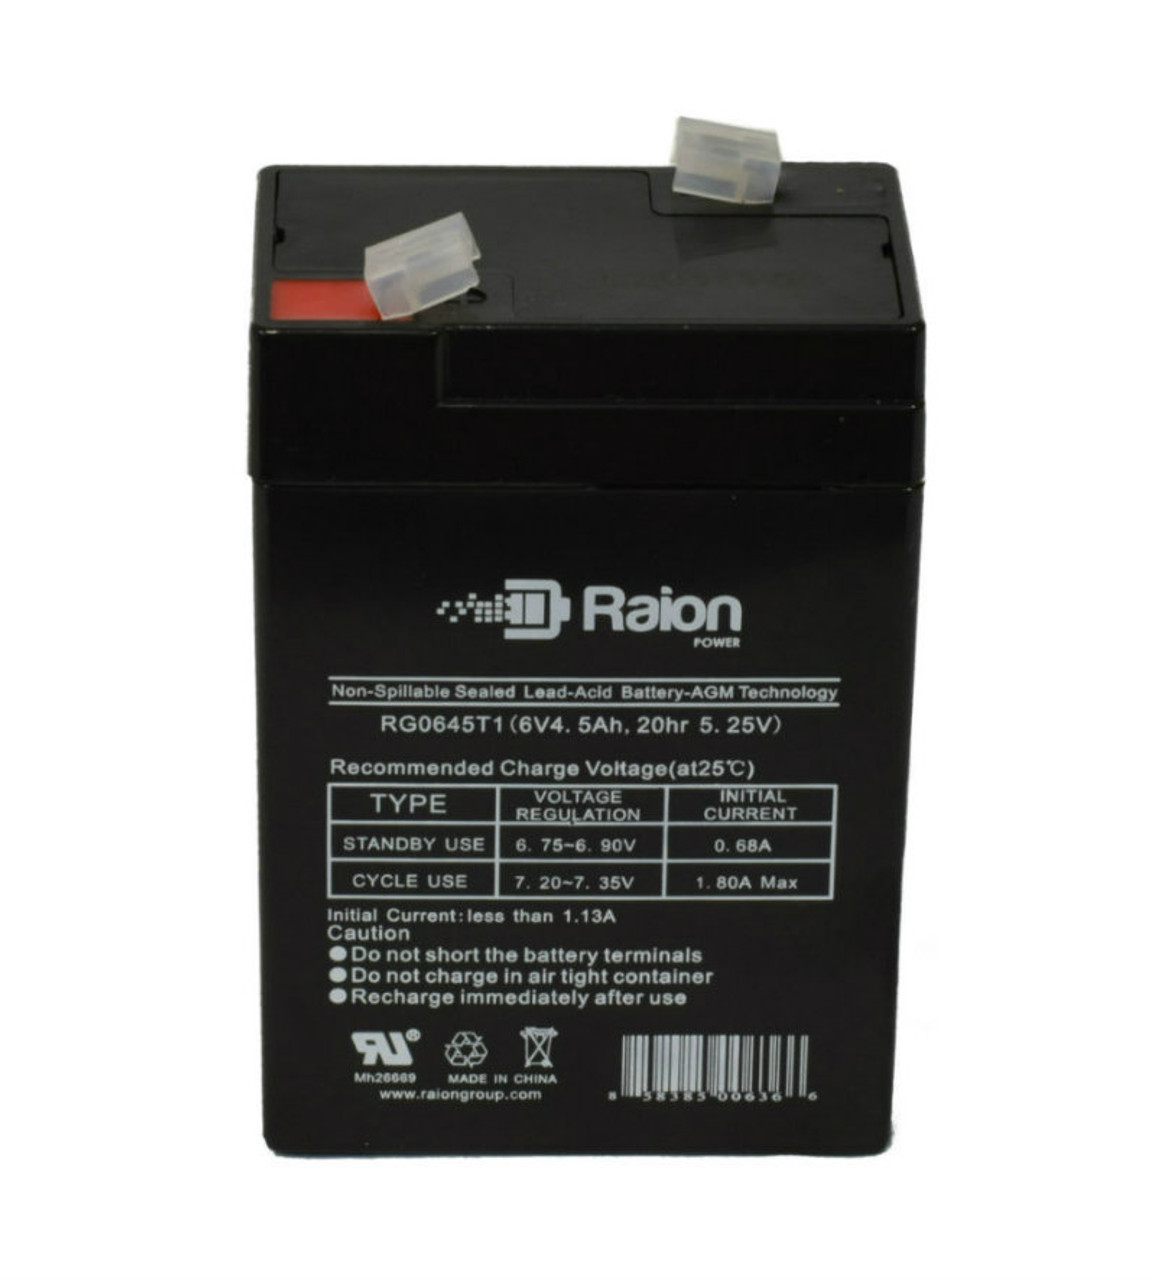 Raion Power RG0645T1 Replacement Battery Cartridge for Vision CP642L